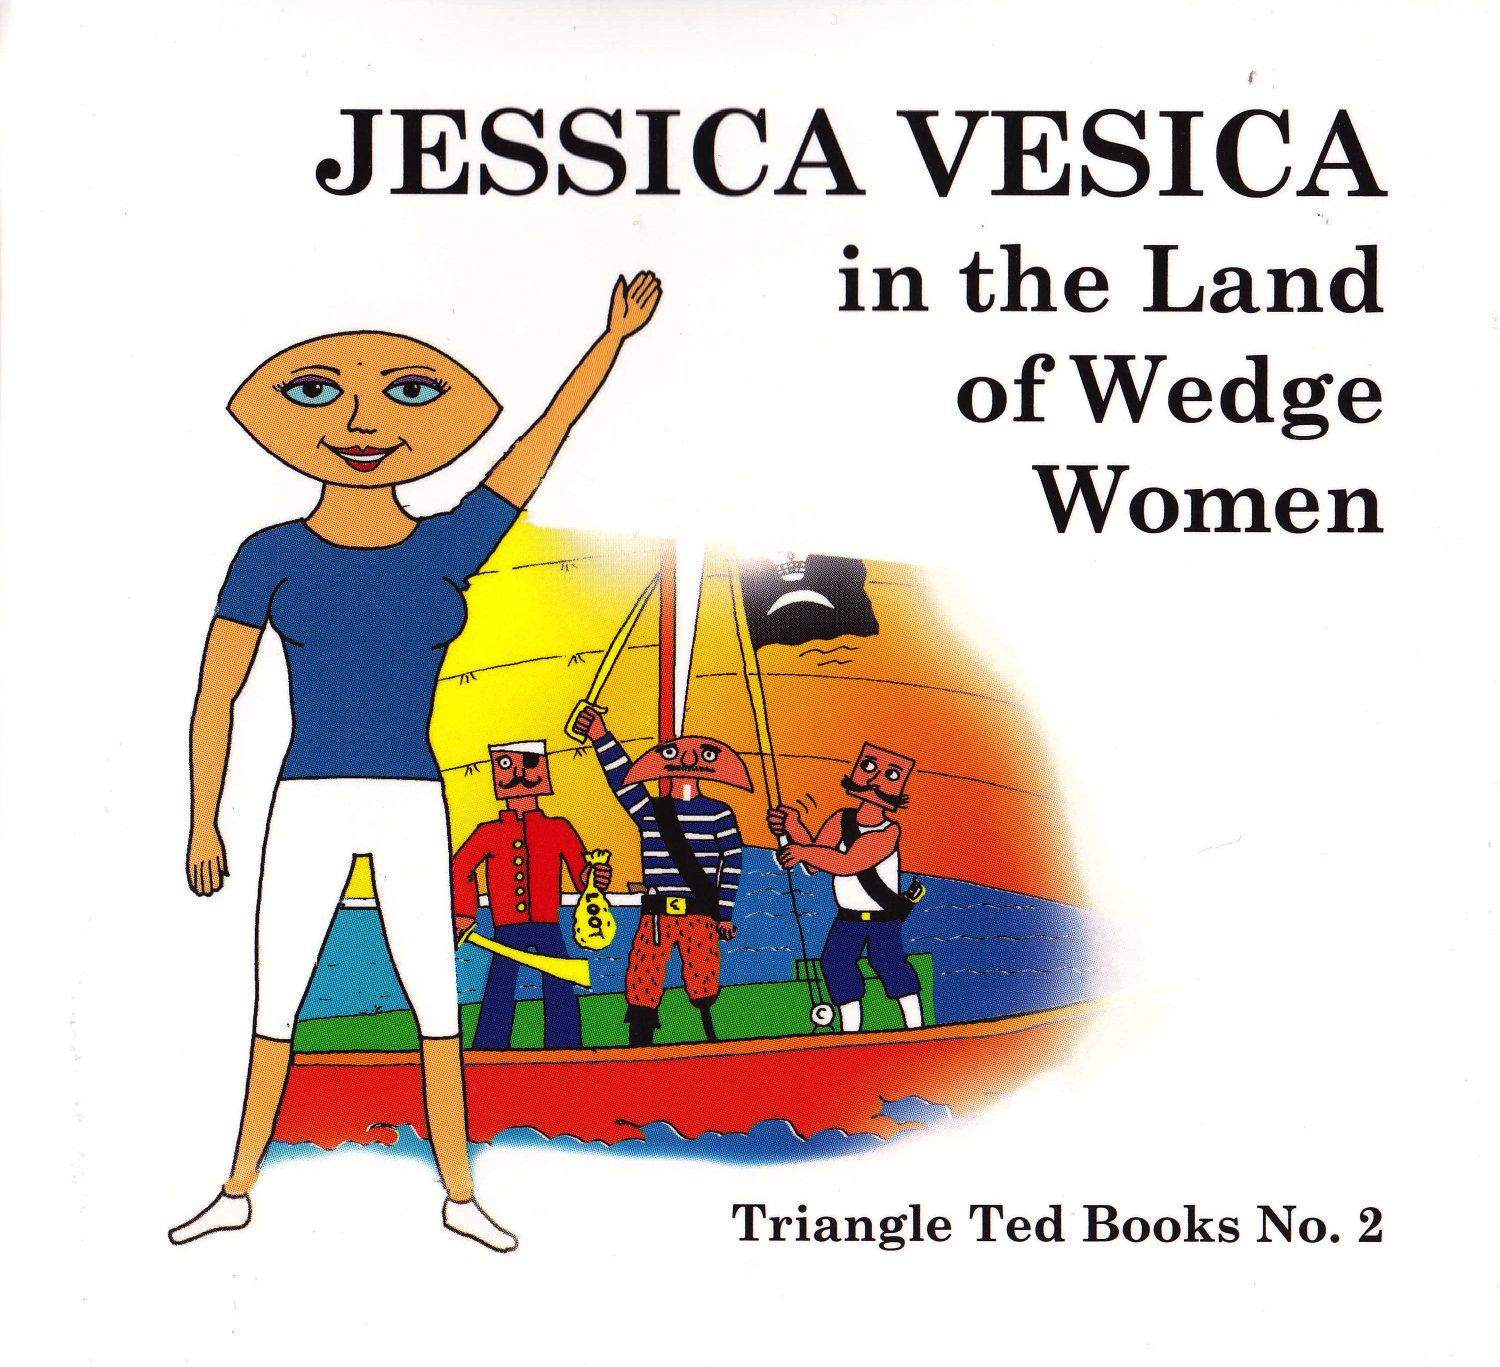 Image of JESSICA VESICA in the Land of Wedge Women